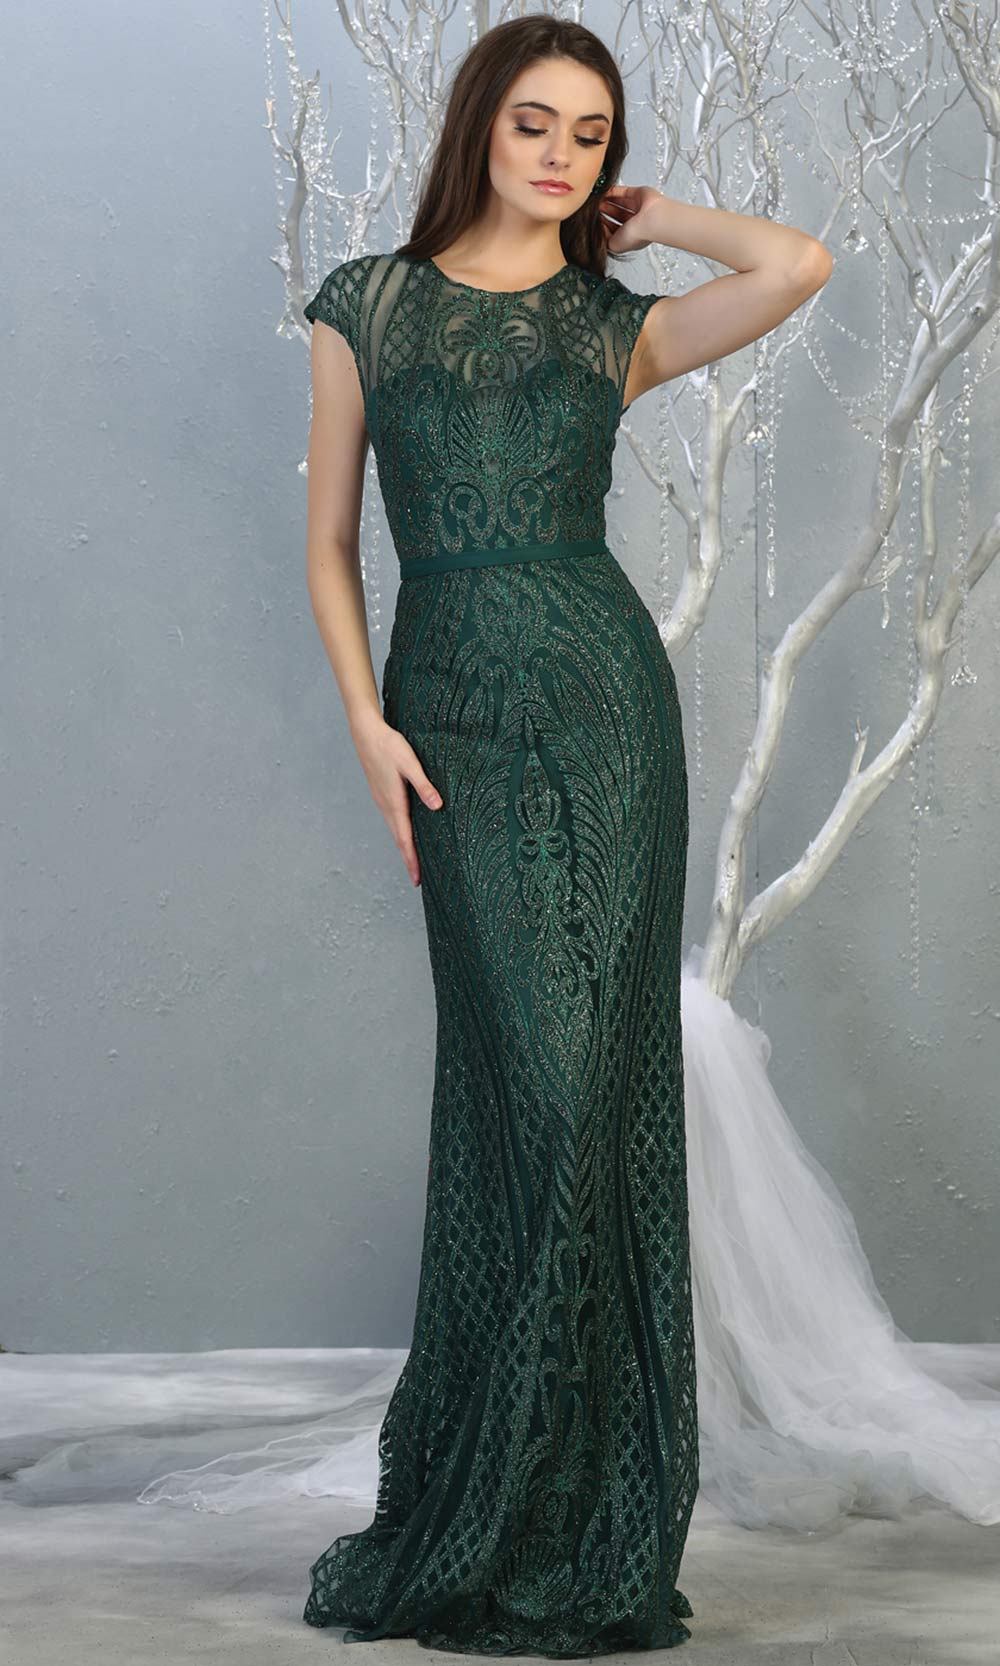 Mayqueen MQ1722 long hunter green beaded fitted dress w/ high neck. This sleek & sexy modest evening dress is perfect for prom, engagement/e-shoot dress, formal wedding guest dress, wedding reception dress. Plus sizes avail in this dark green dress.jpg